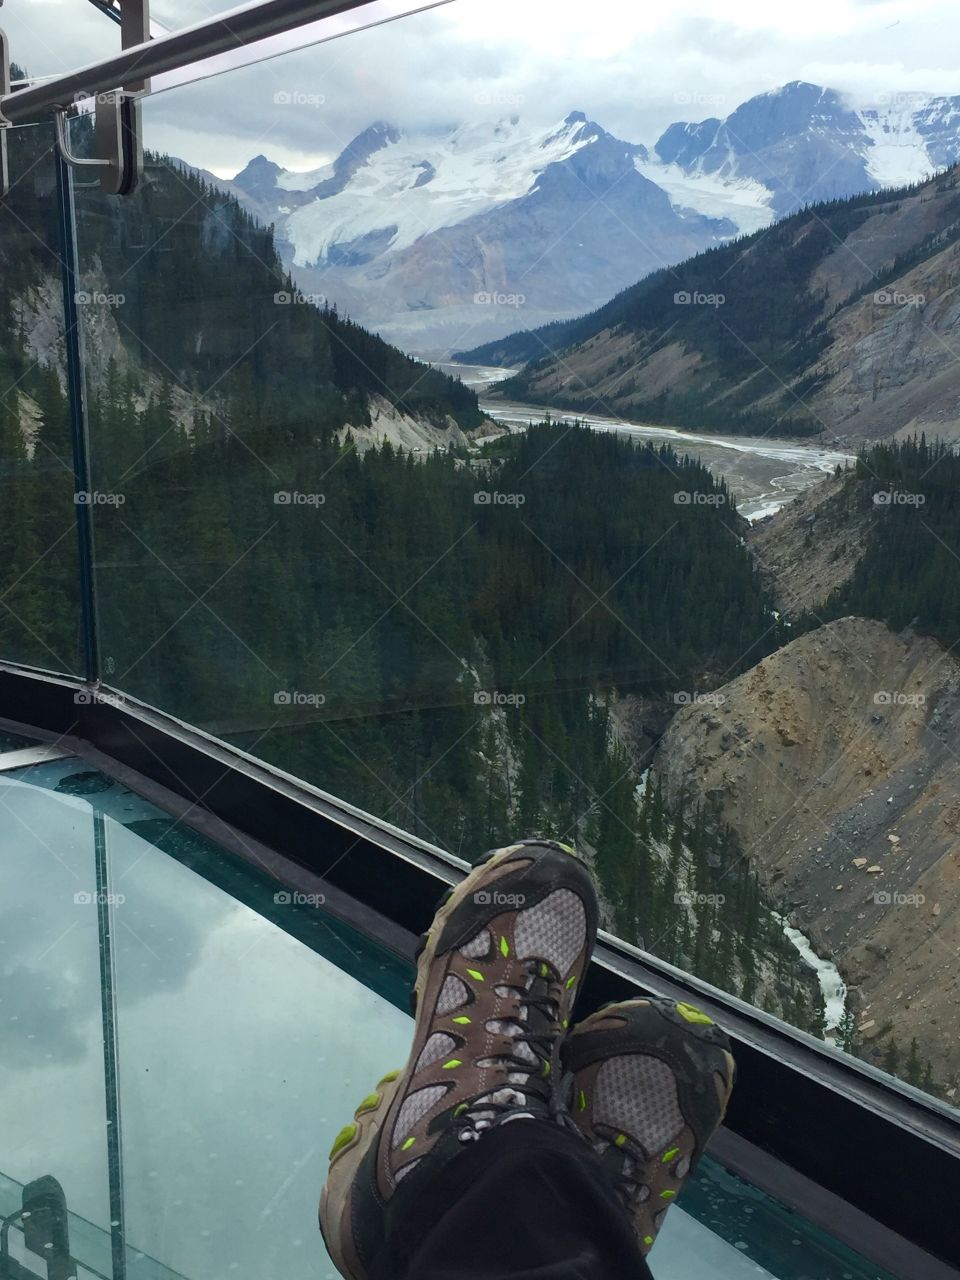 My view of the Canadian Rockies from the Glacier Skywalk